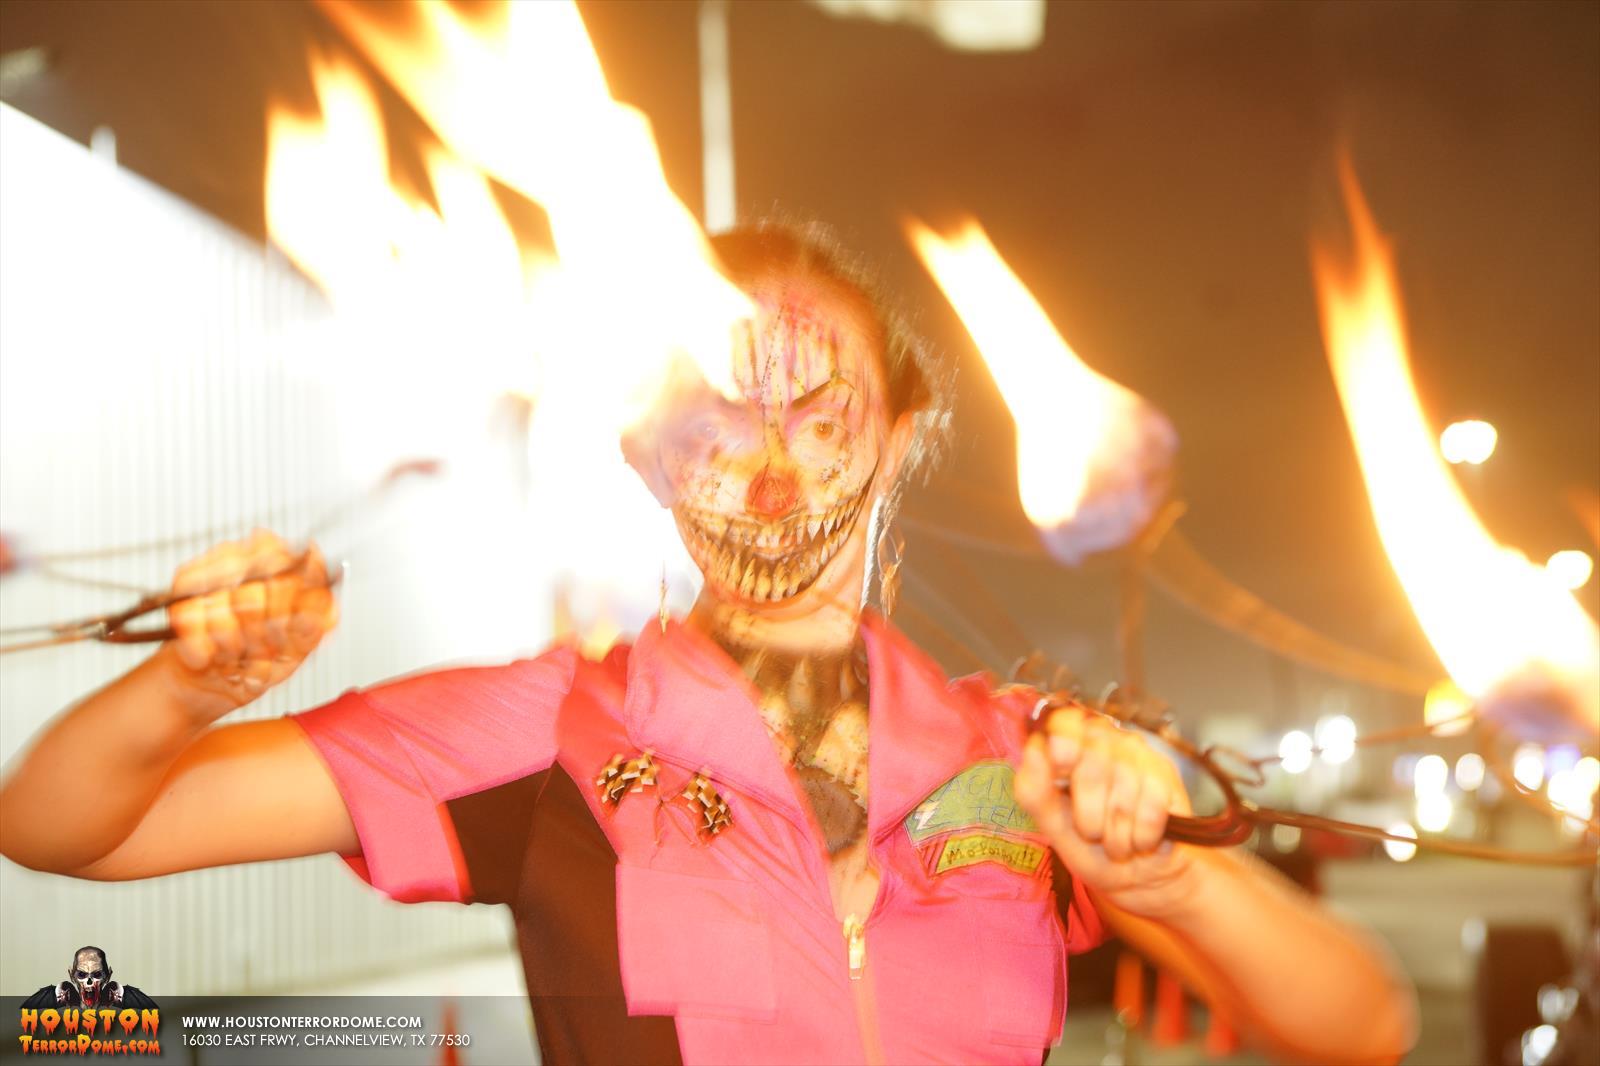 NHRA racers and fire dancer Night